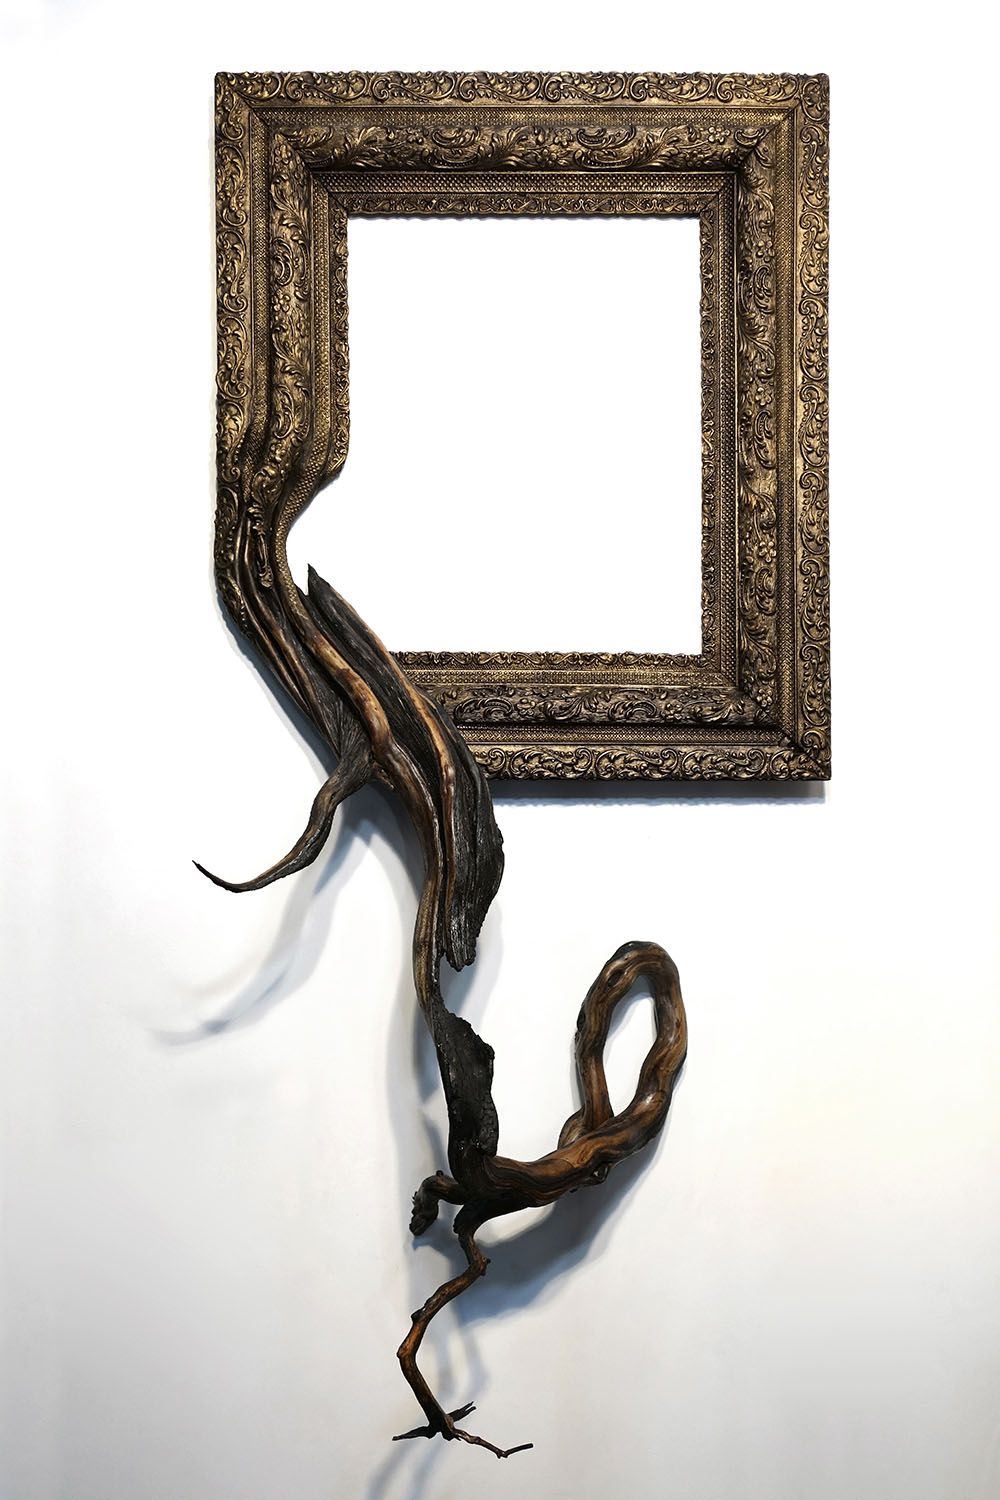 Tree Roots And Branches Fused With Ornate Picture Frames By Darryl Cox 12